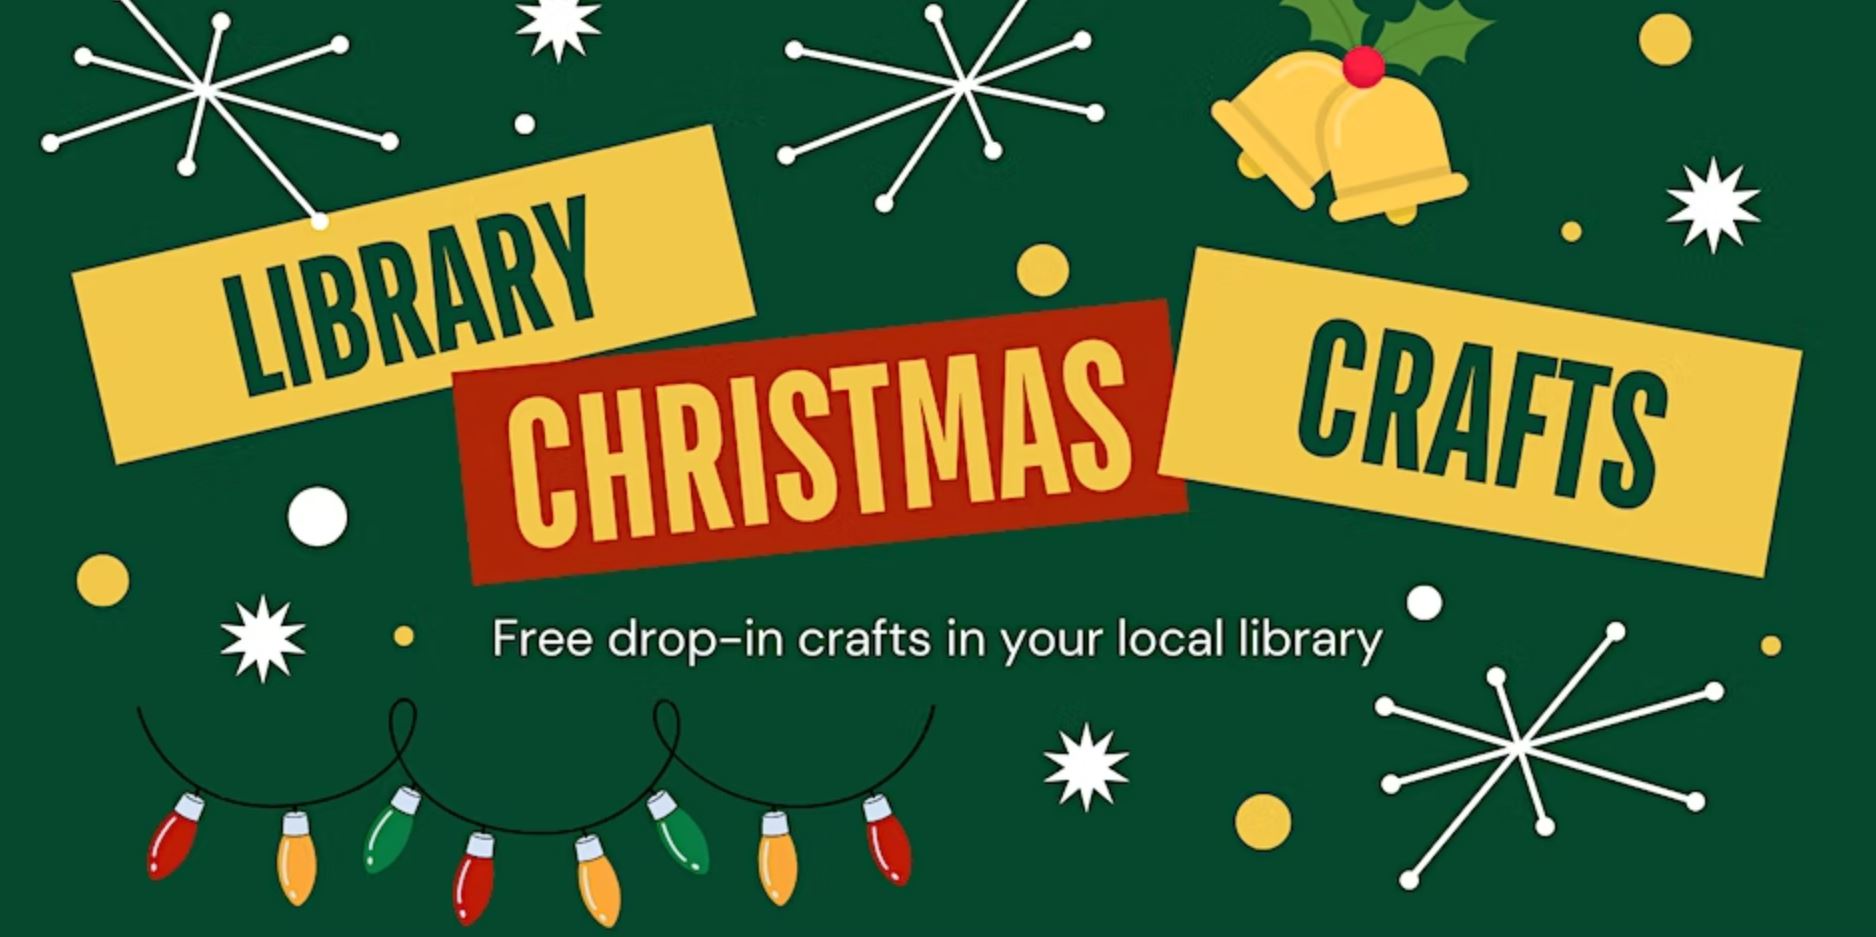 Library Christmas Crafts - free drop in crafts in your local library. Yellow, red and green wording on a Christmas-themed green background with stars and Christmas lights.